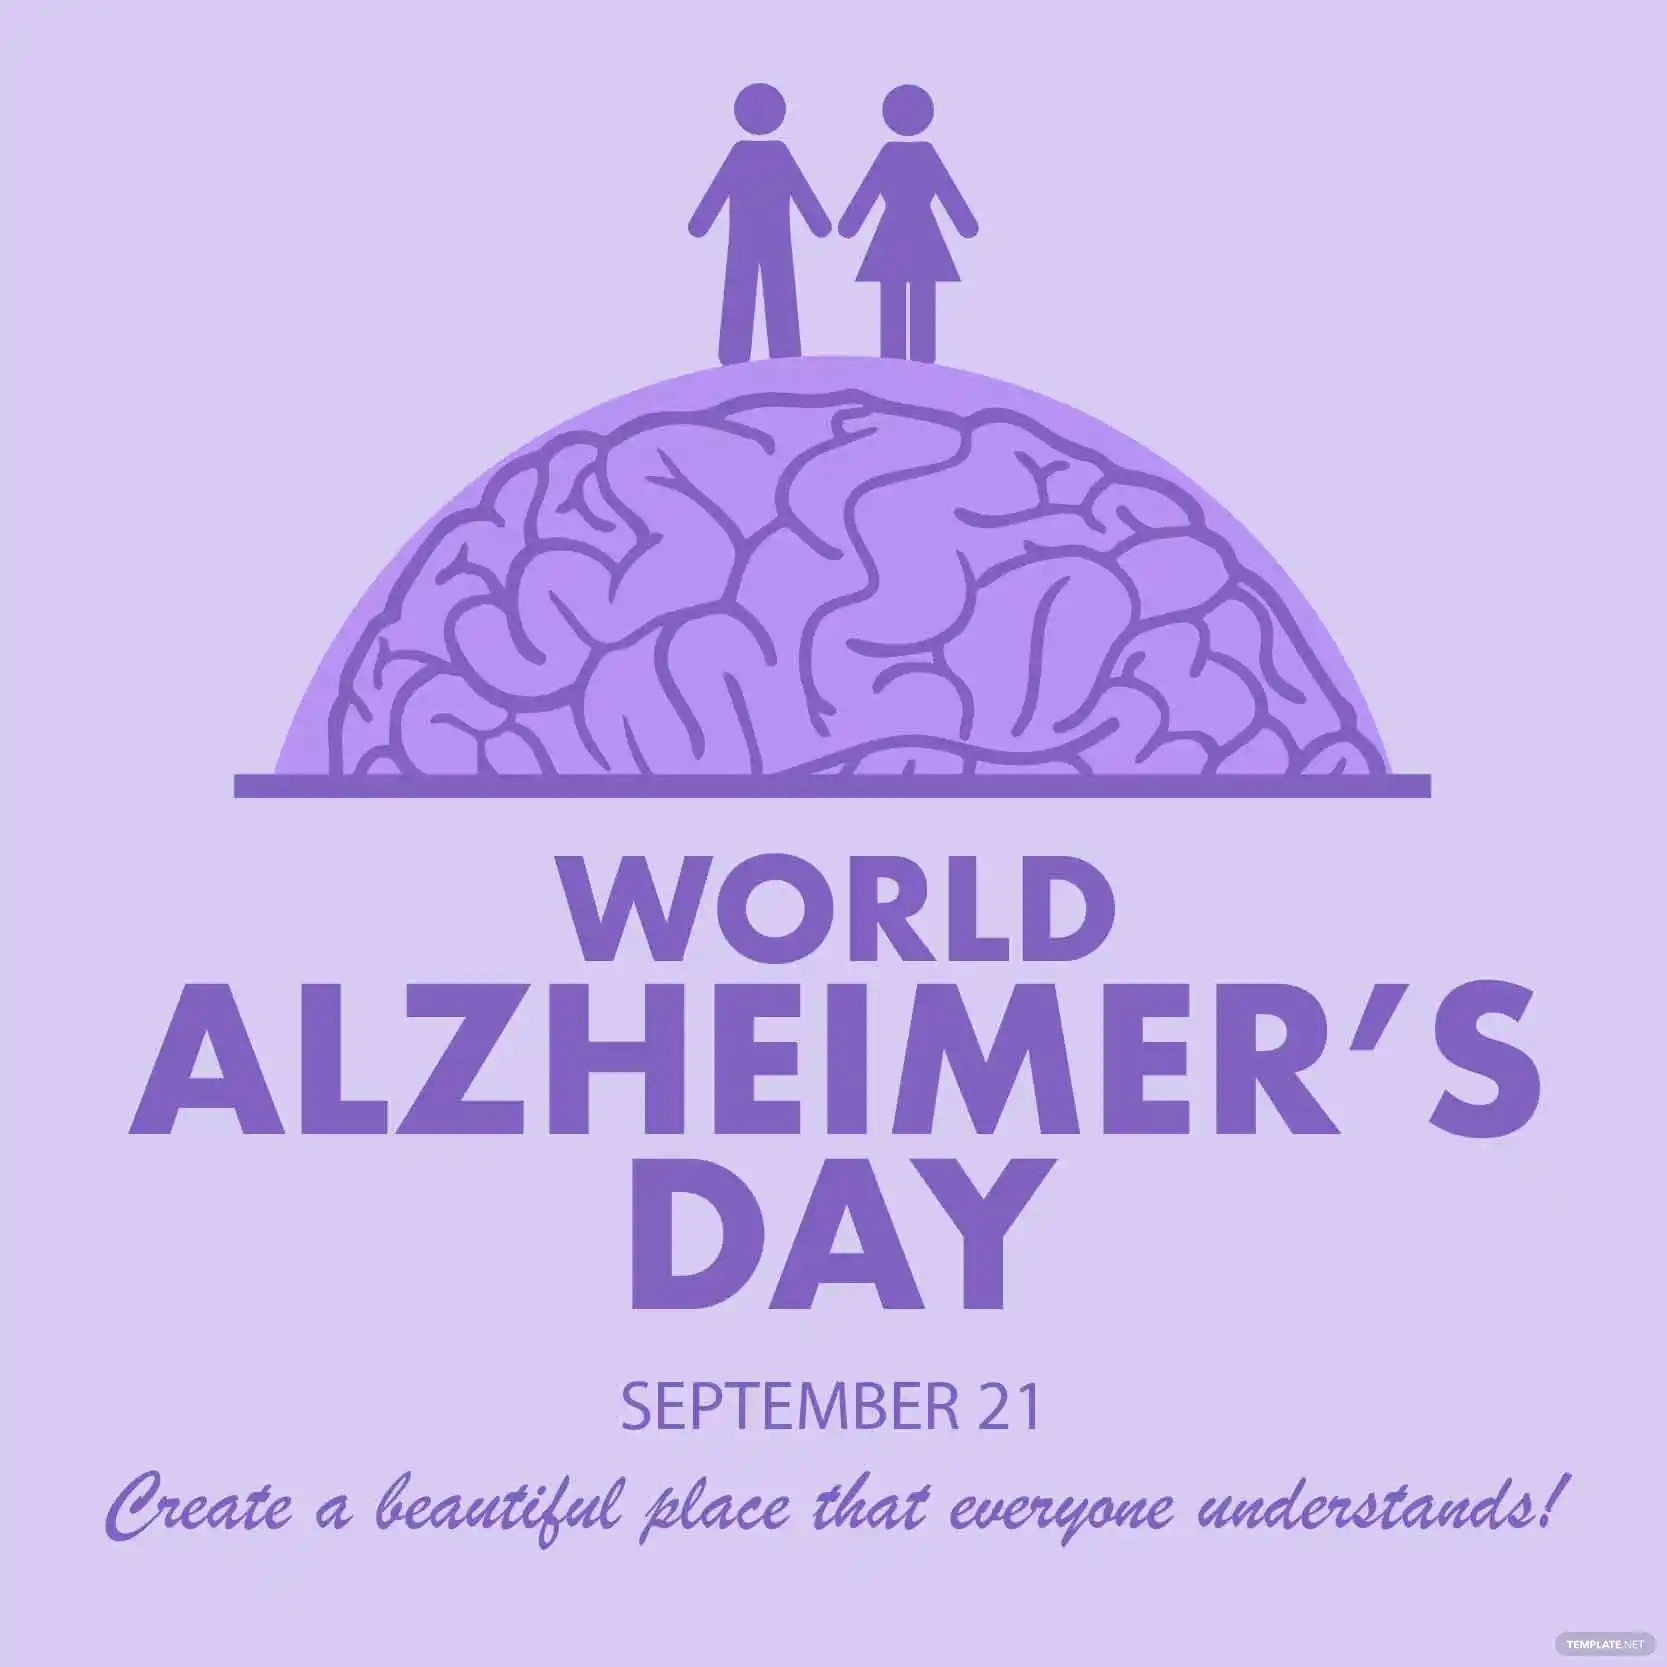 world alzheimer’s day whatsapp post ideas and examples